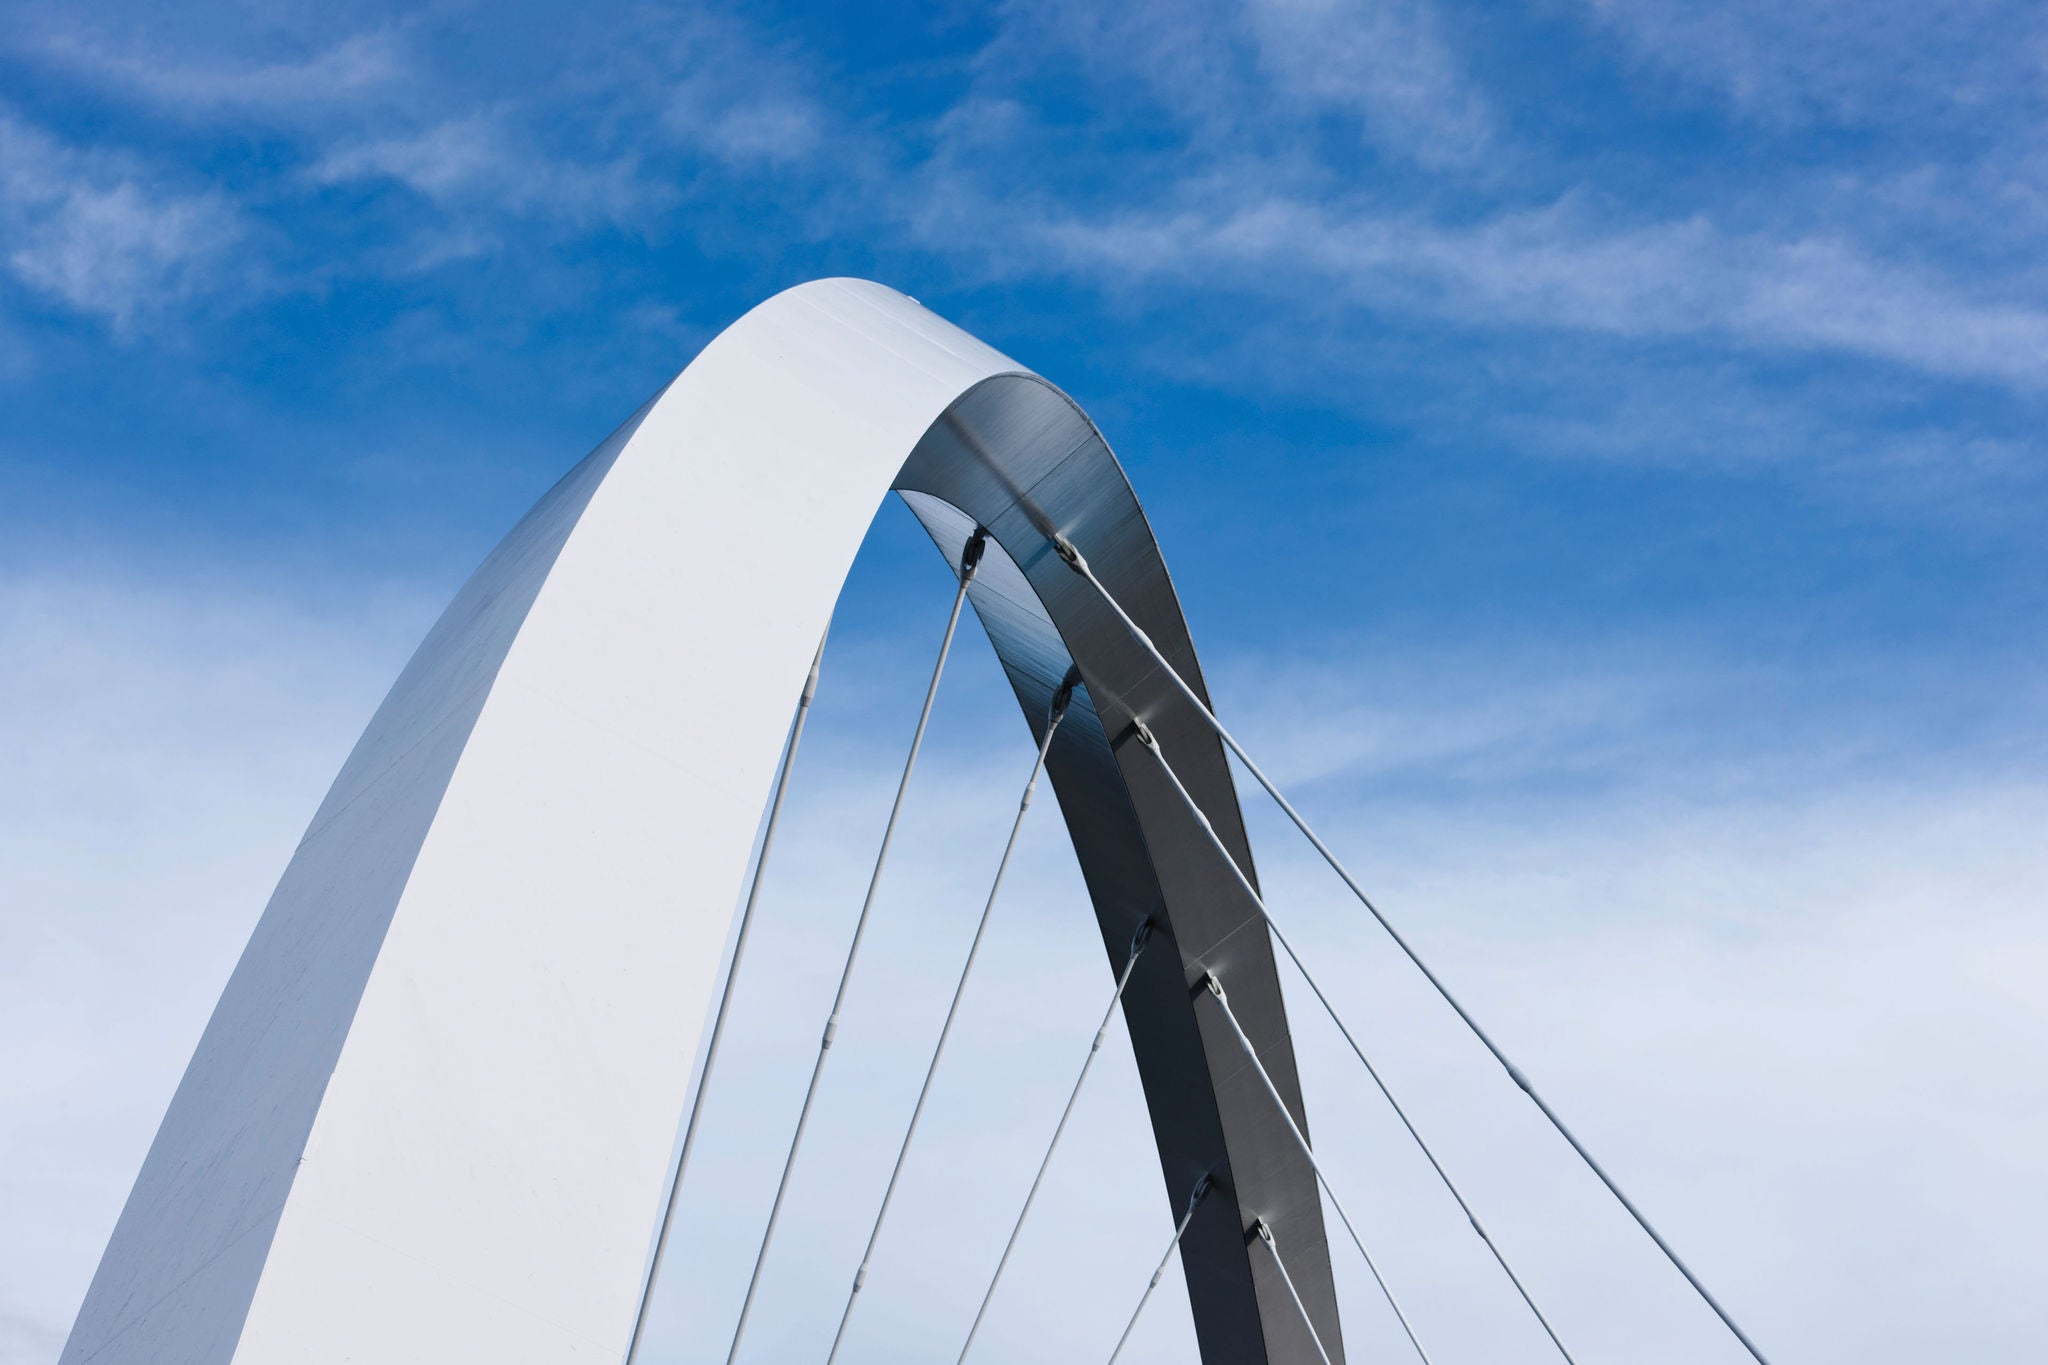 Abstract view of the arch of the Finnieston Bridge in Glasgow, Scotland.The Finnieston Bridge crosses over the River Clyde in Glasgow - also known as the Clyde Arc and, less formally, the "Squinty Bridge".